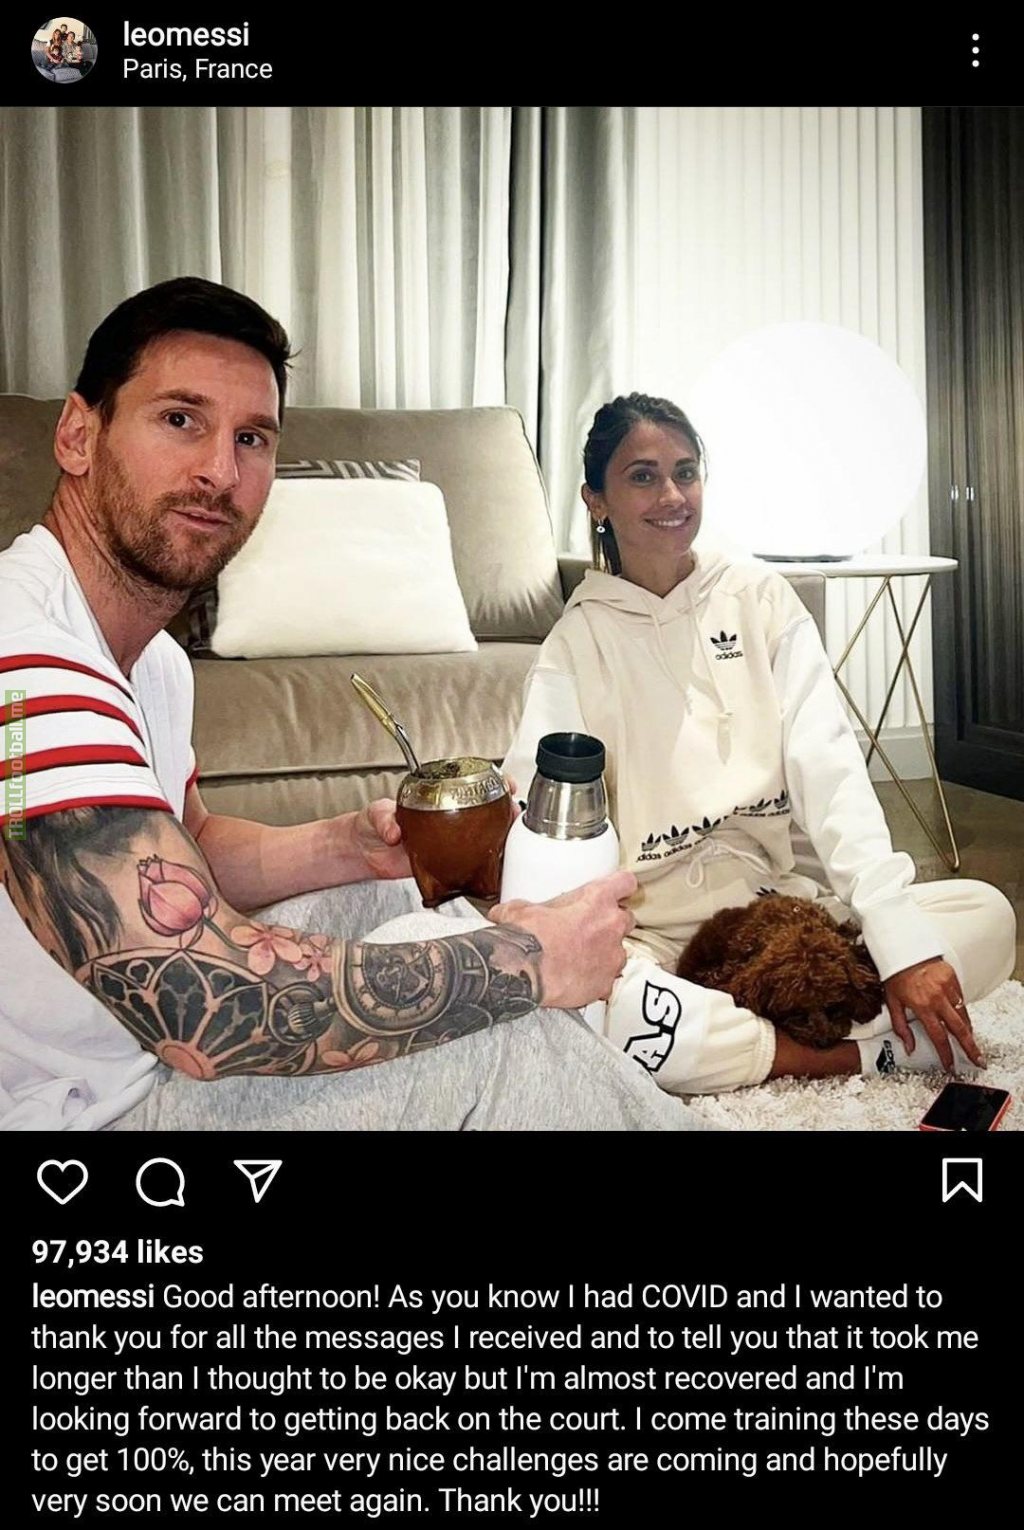 Leo Messi on “Good afternoon! As you know I had COVID and I to you for all the messages I received and to tell you that it took me